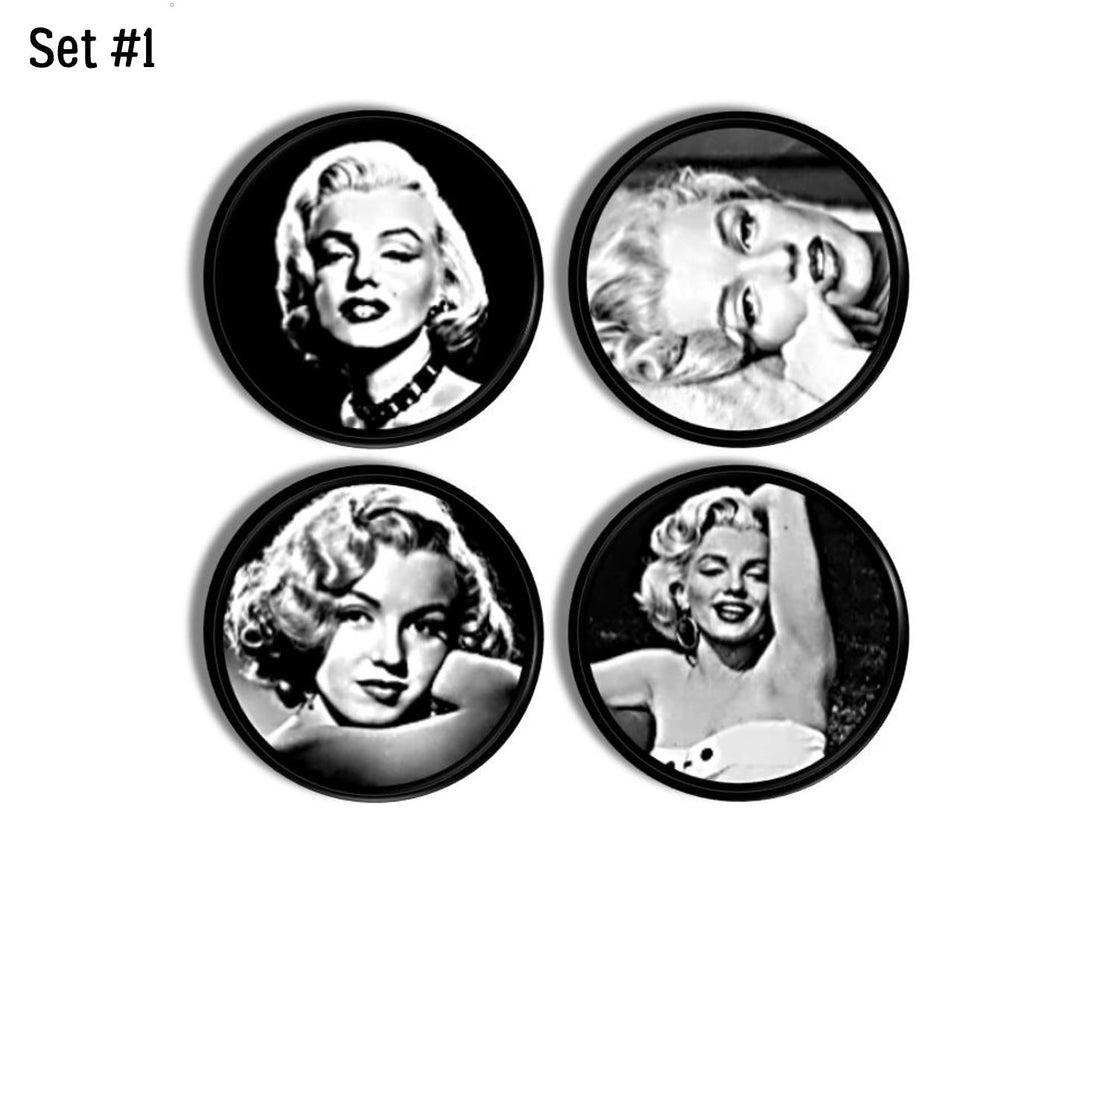 Iconic black white decor Marilyn Monroe image cabinet door knobs. Drawer pull handles for Hollywood chic contemporary furniture.